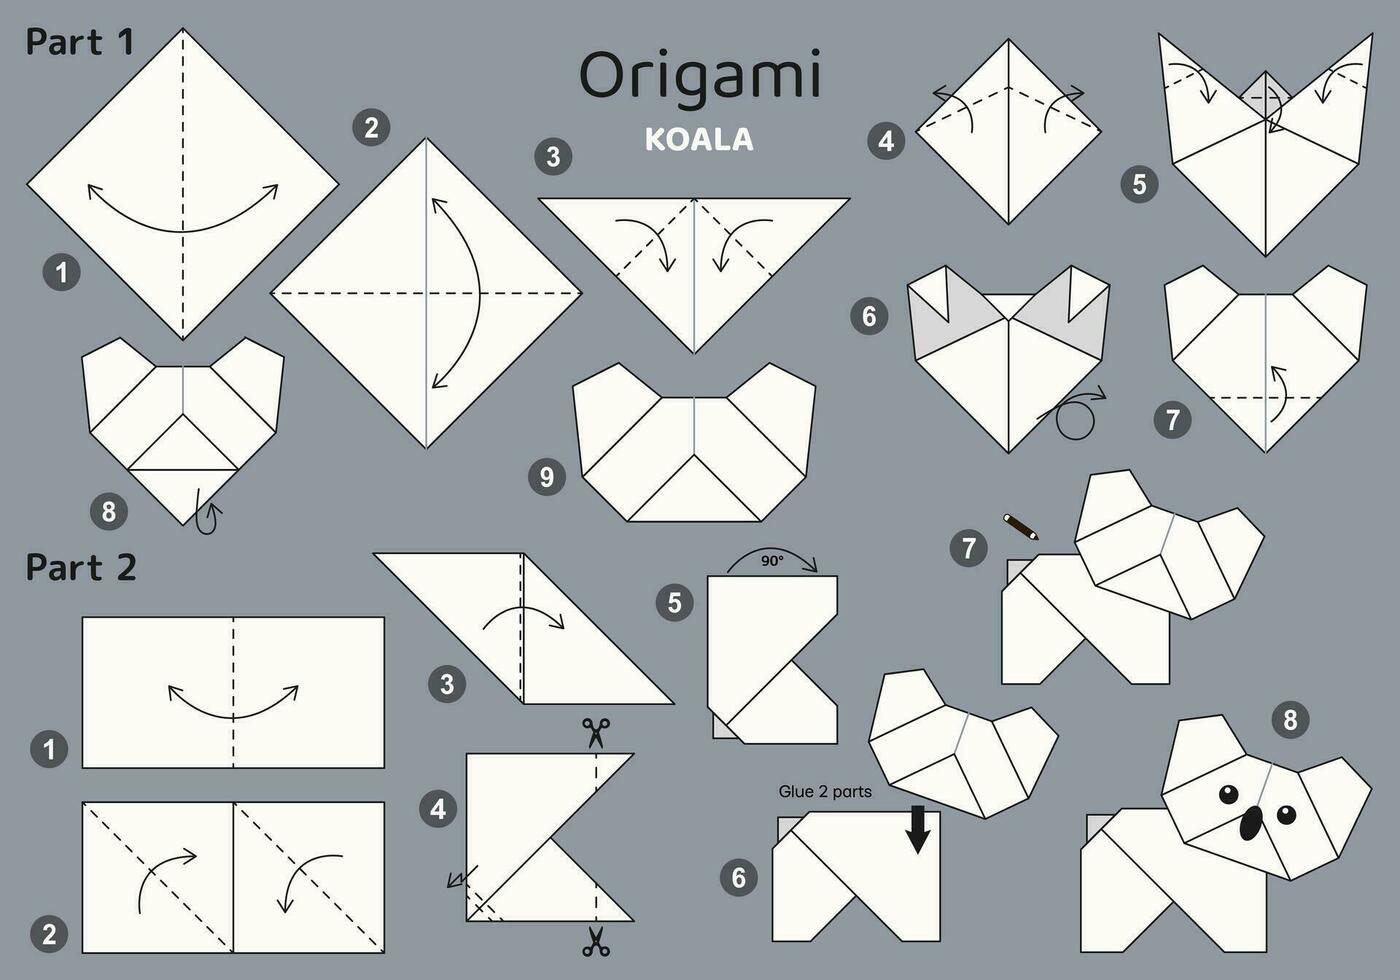 Koala origami scheme tutorial moving model on grey backdrop. Origami for kids. Step by step how to make a cute origami koala. Vector illustration.